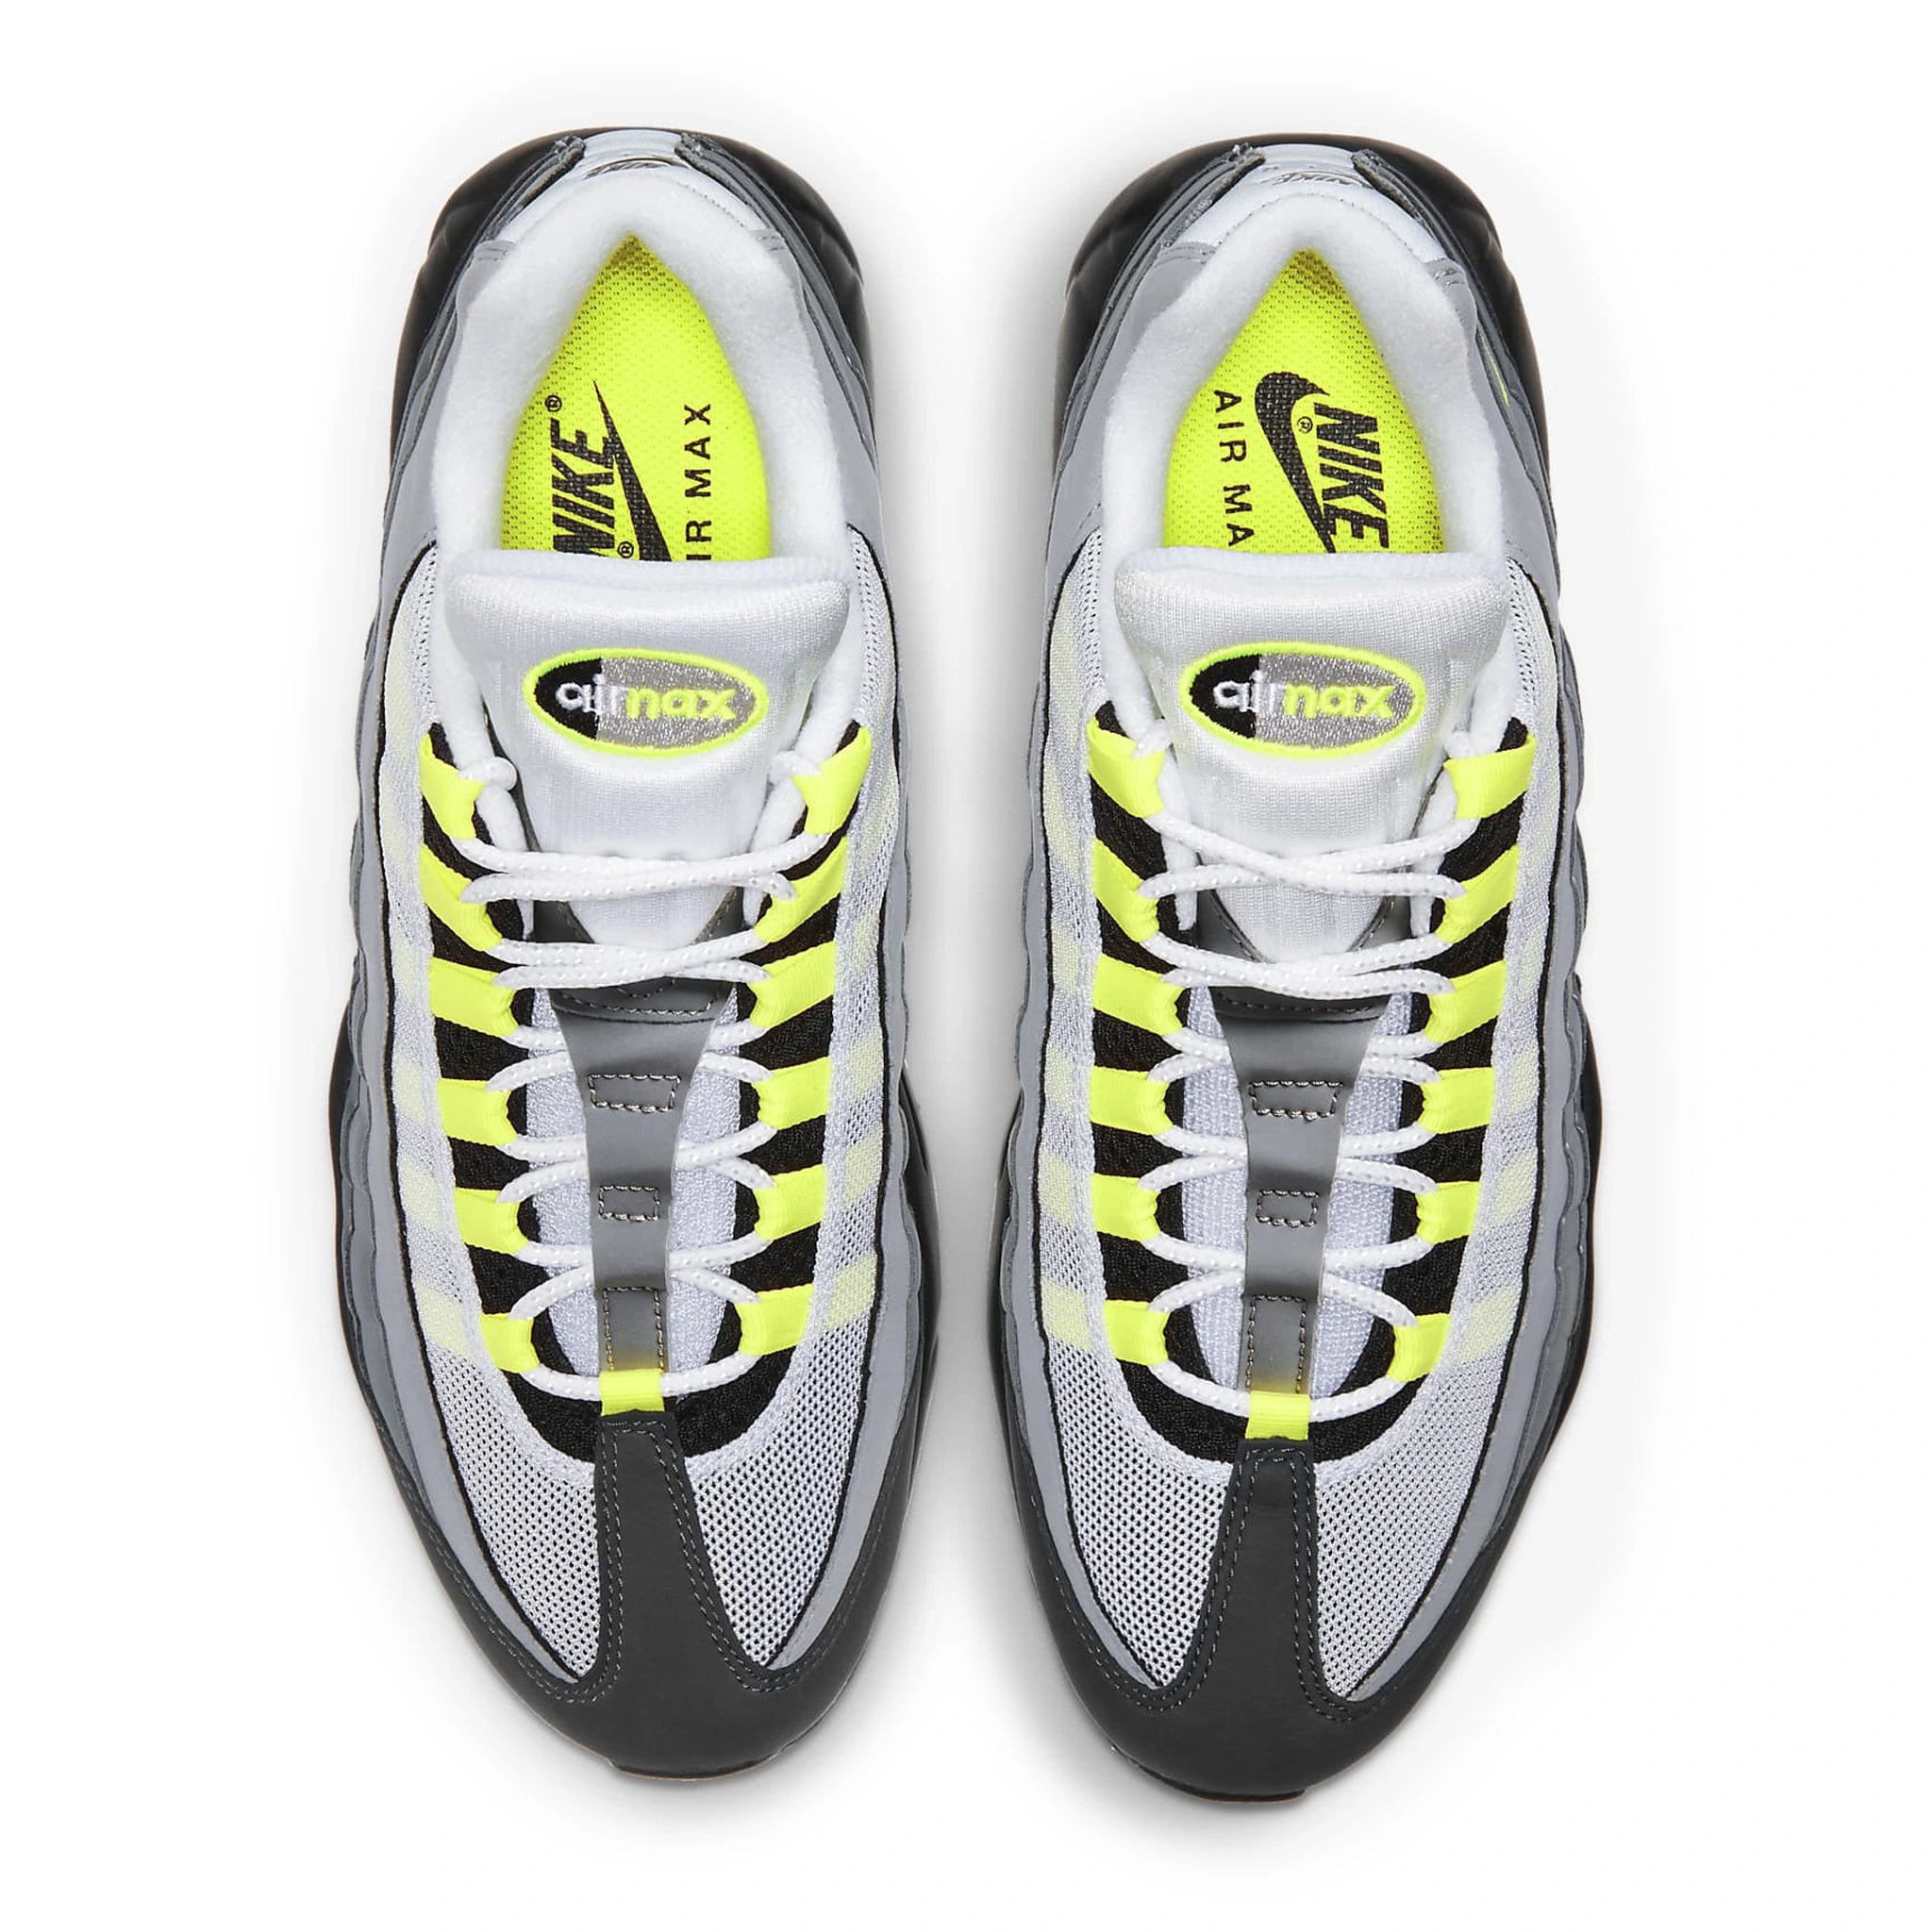 Top side view of Nike Air Max 95 OG Neon CT1689-001